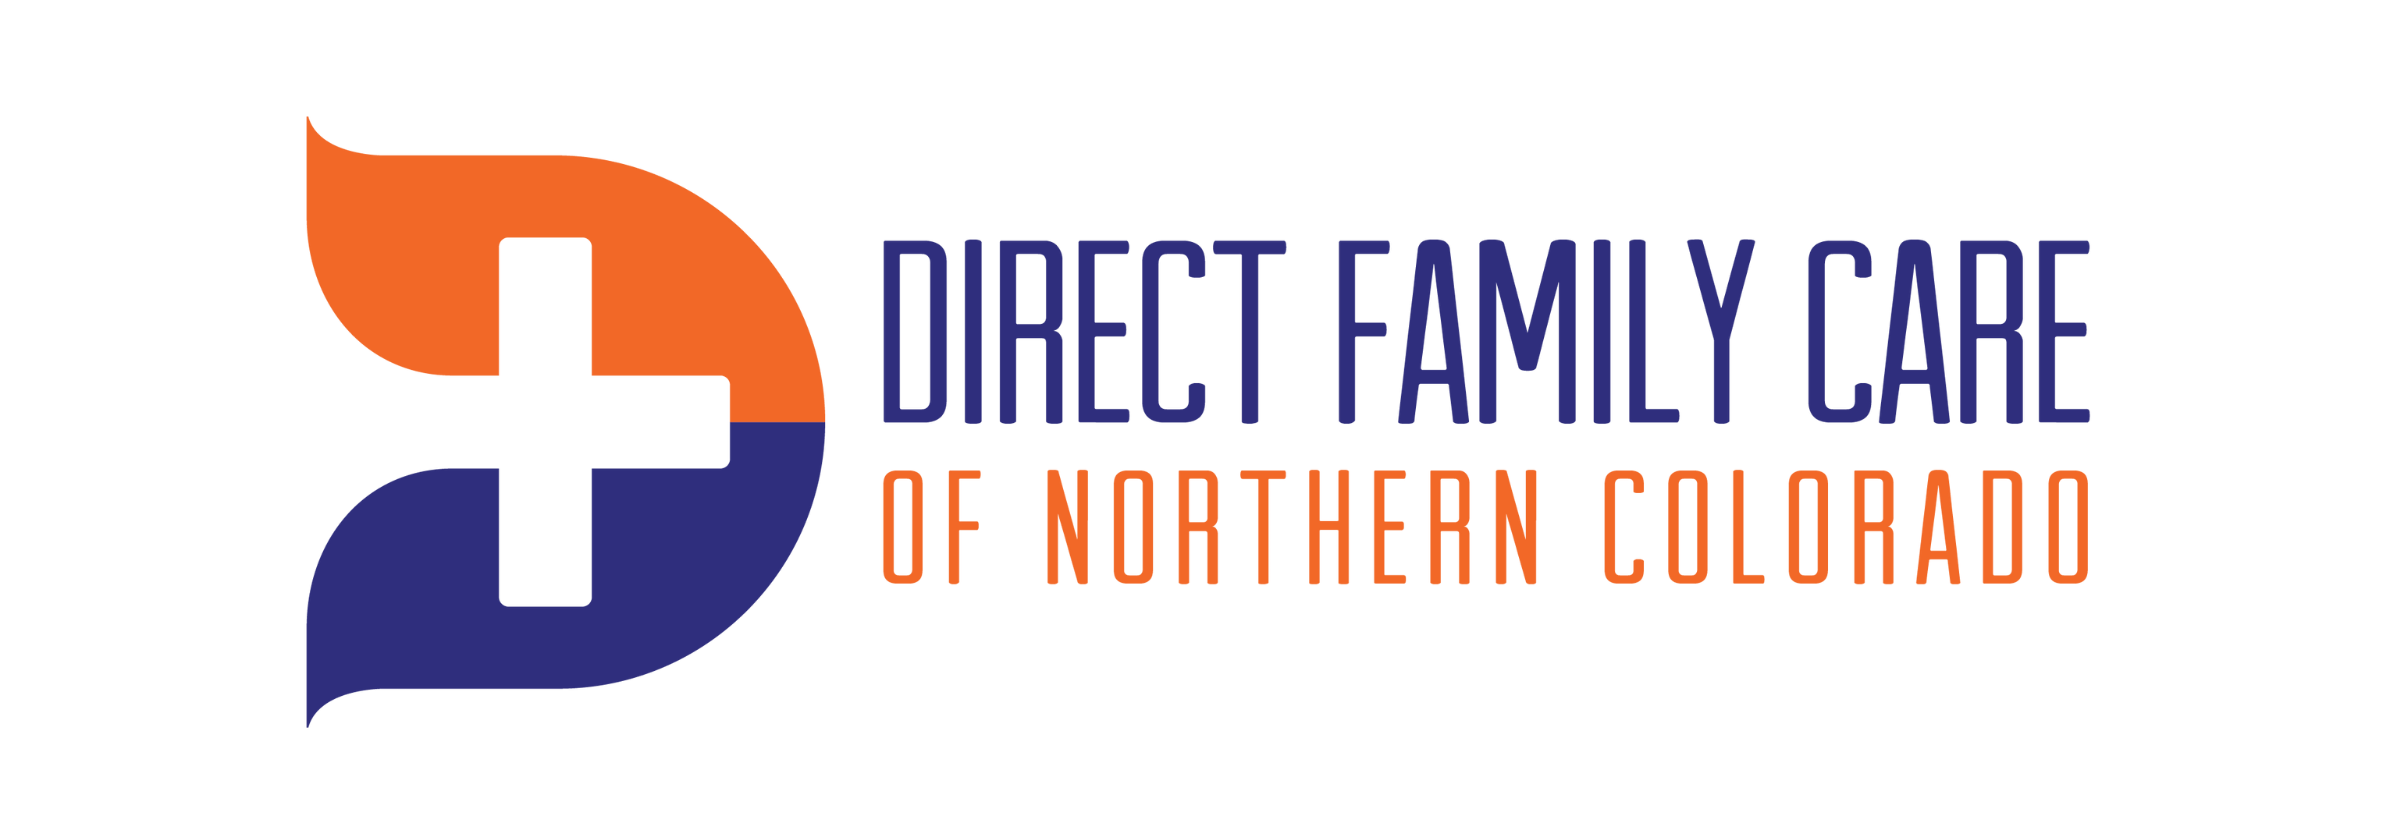 Direct Family Care of Northern Colorado